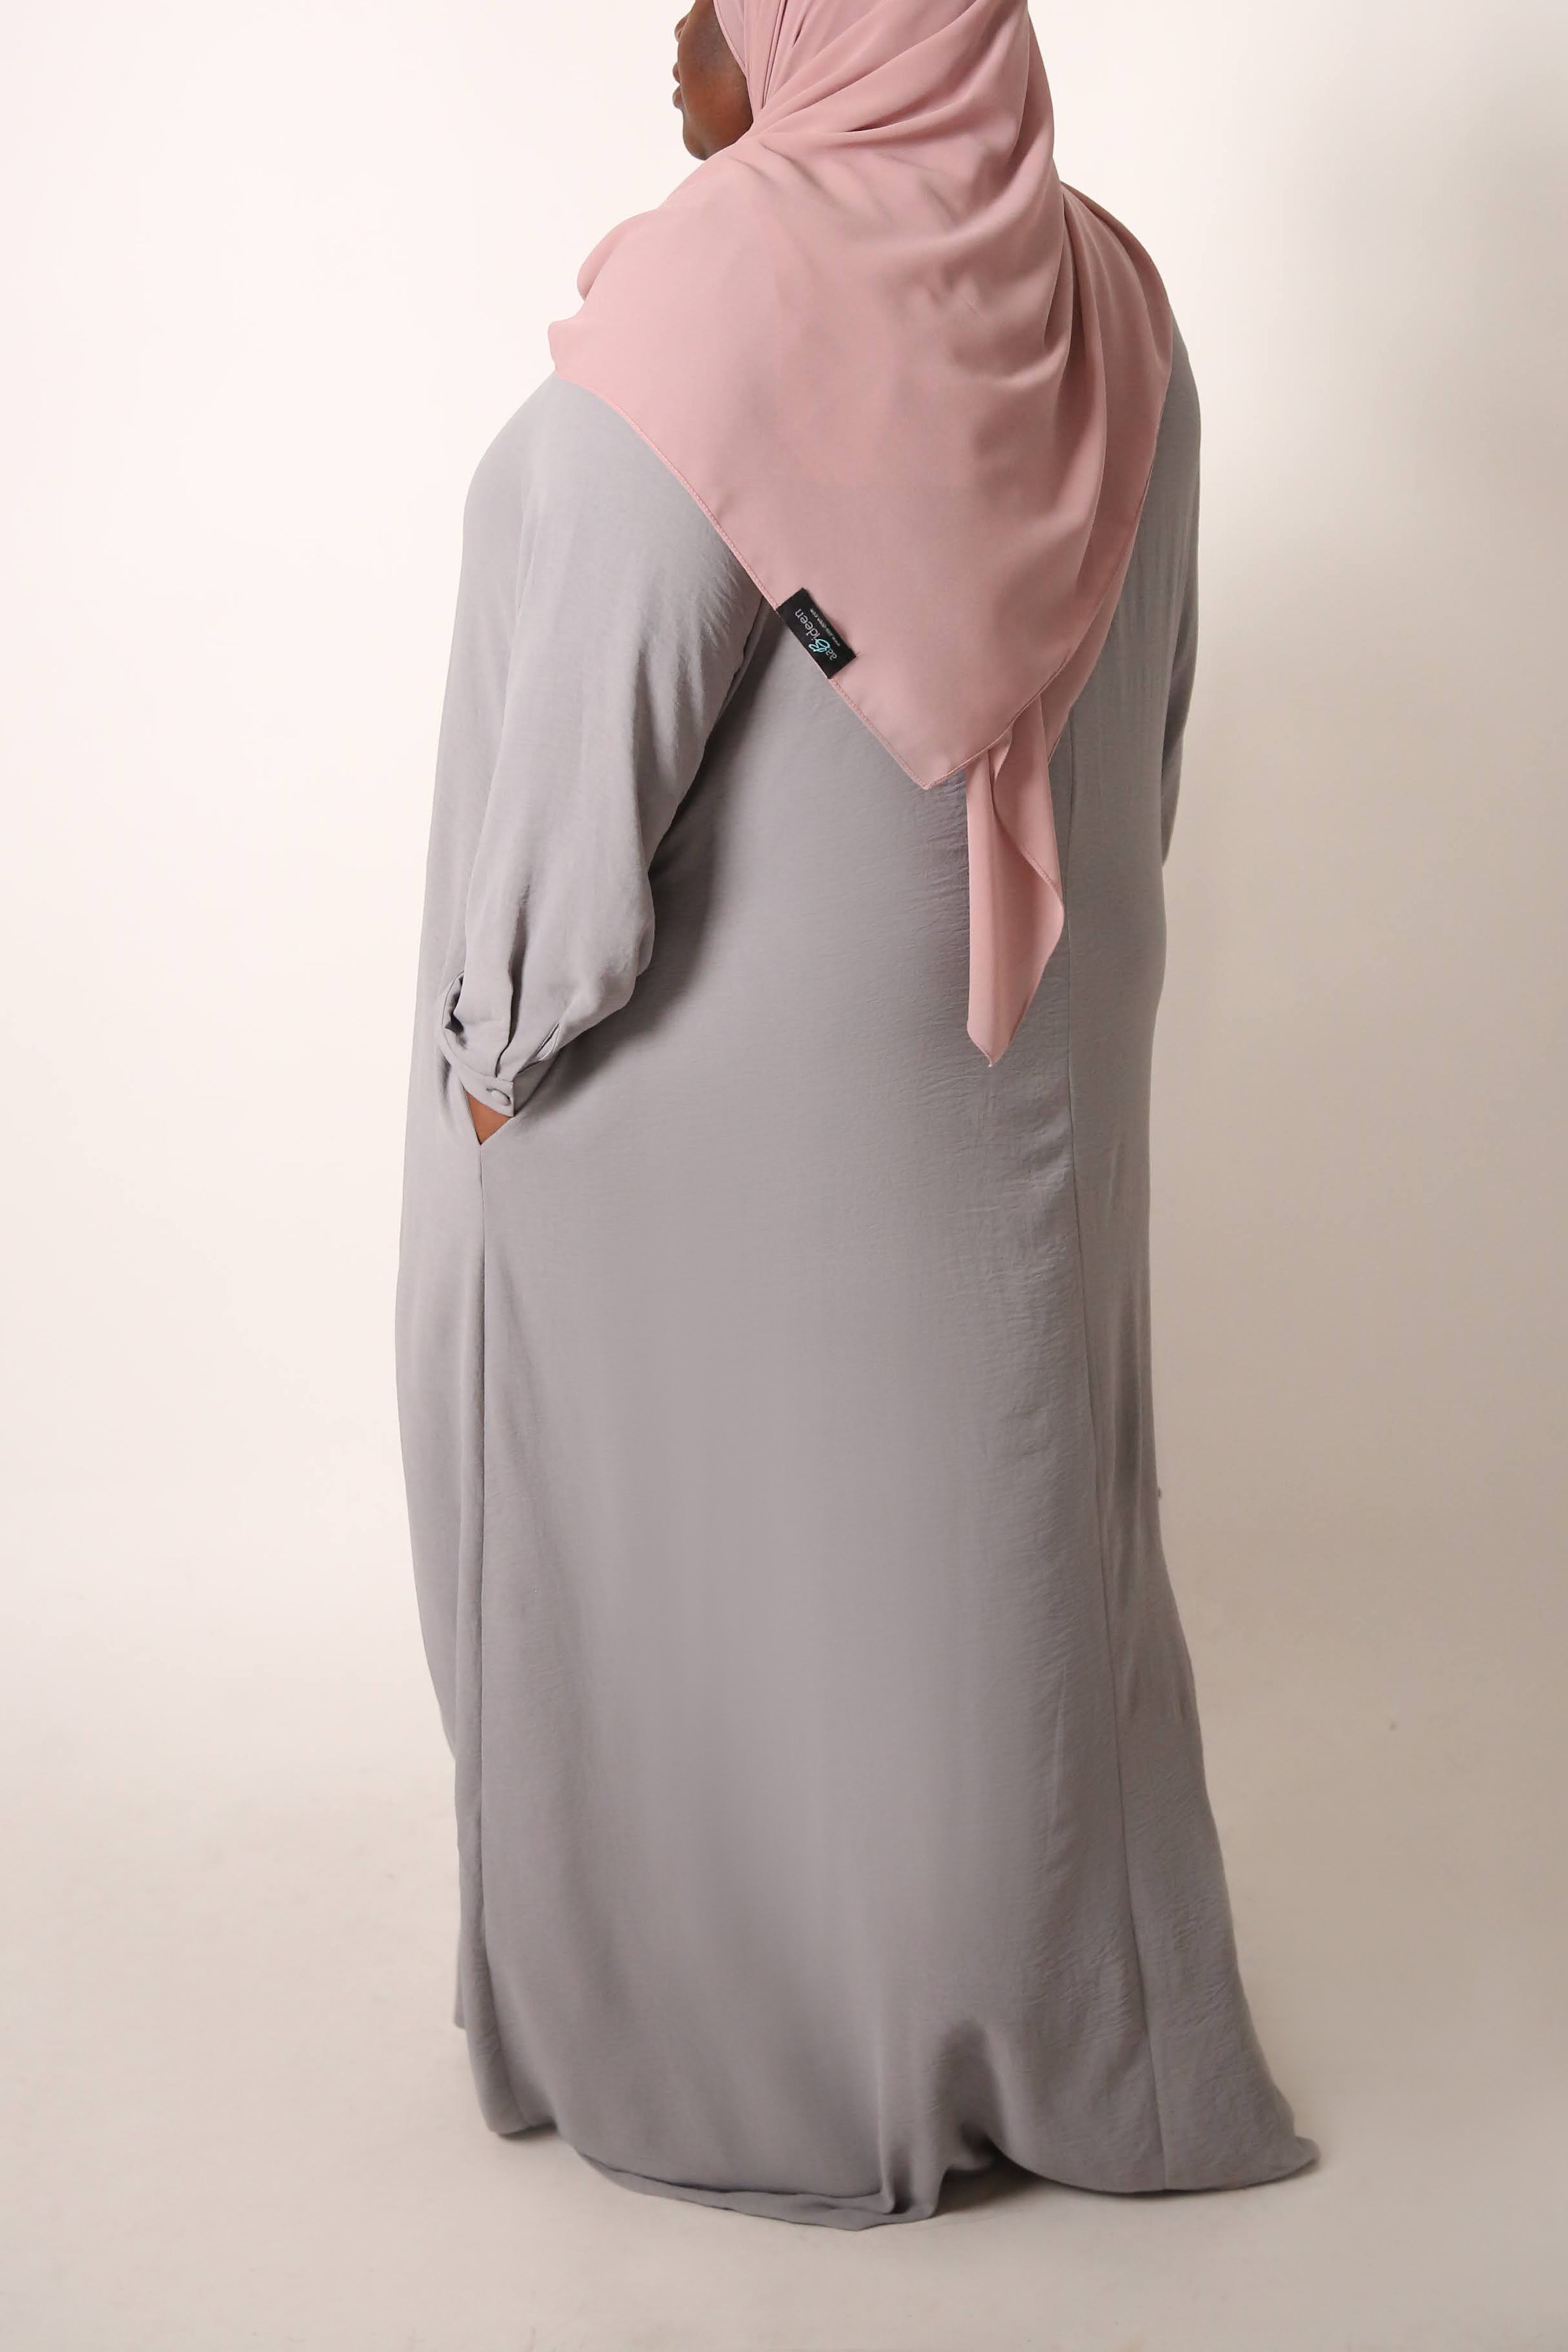 Grey Button Front Crinkle Abaya